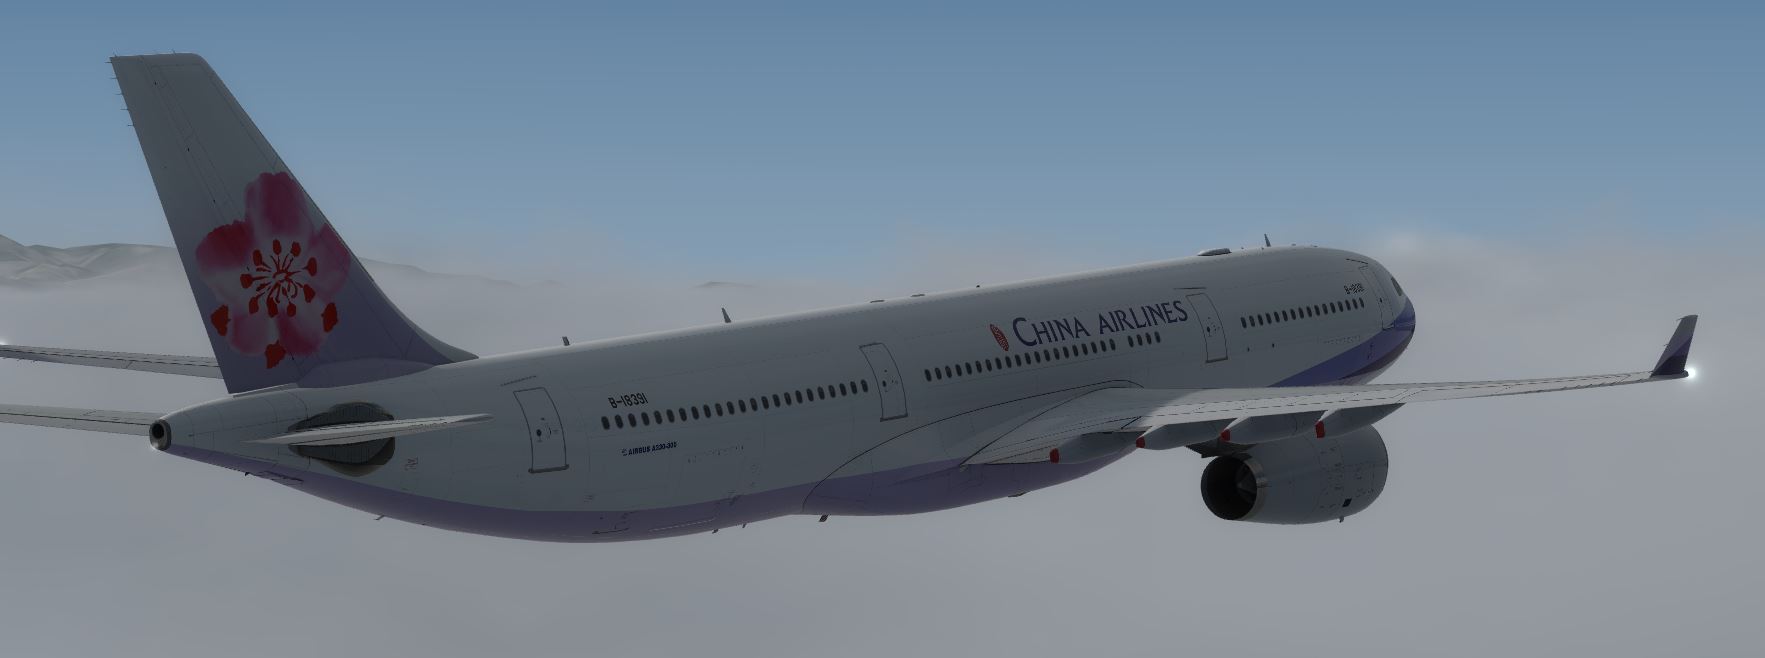 AS A330 ChinaAirline-3144 